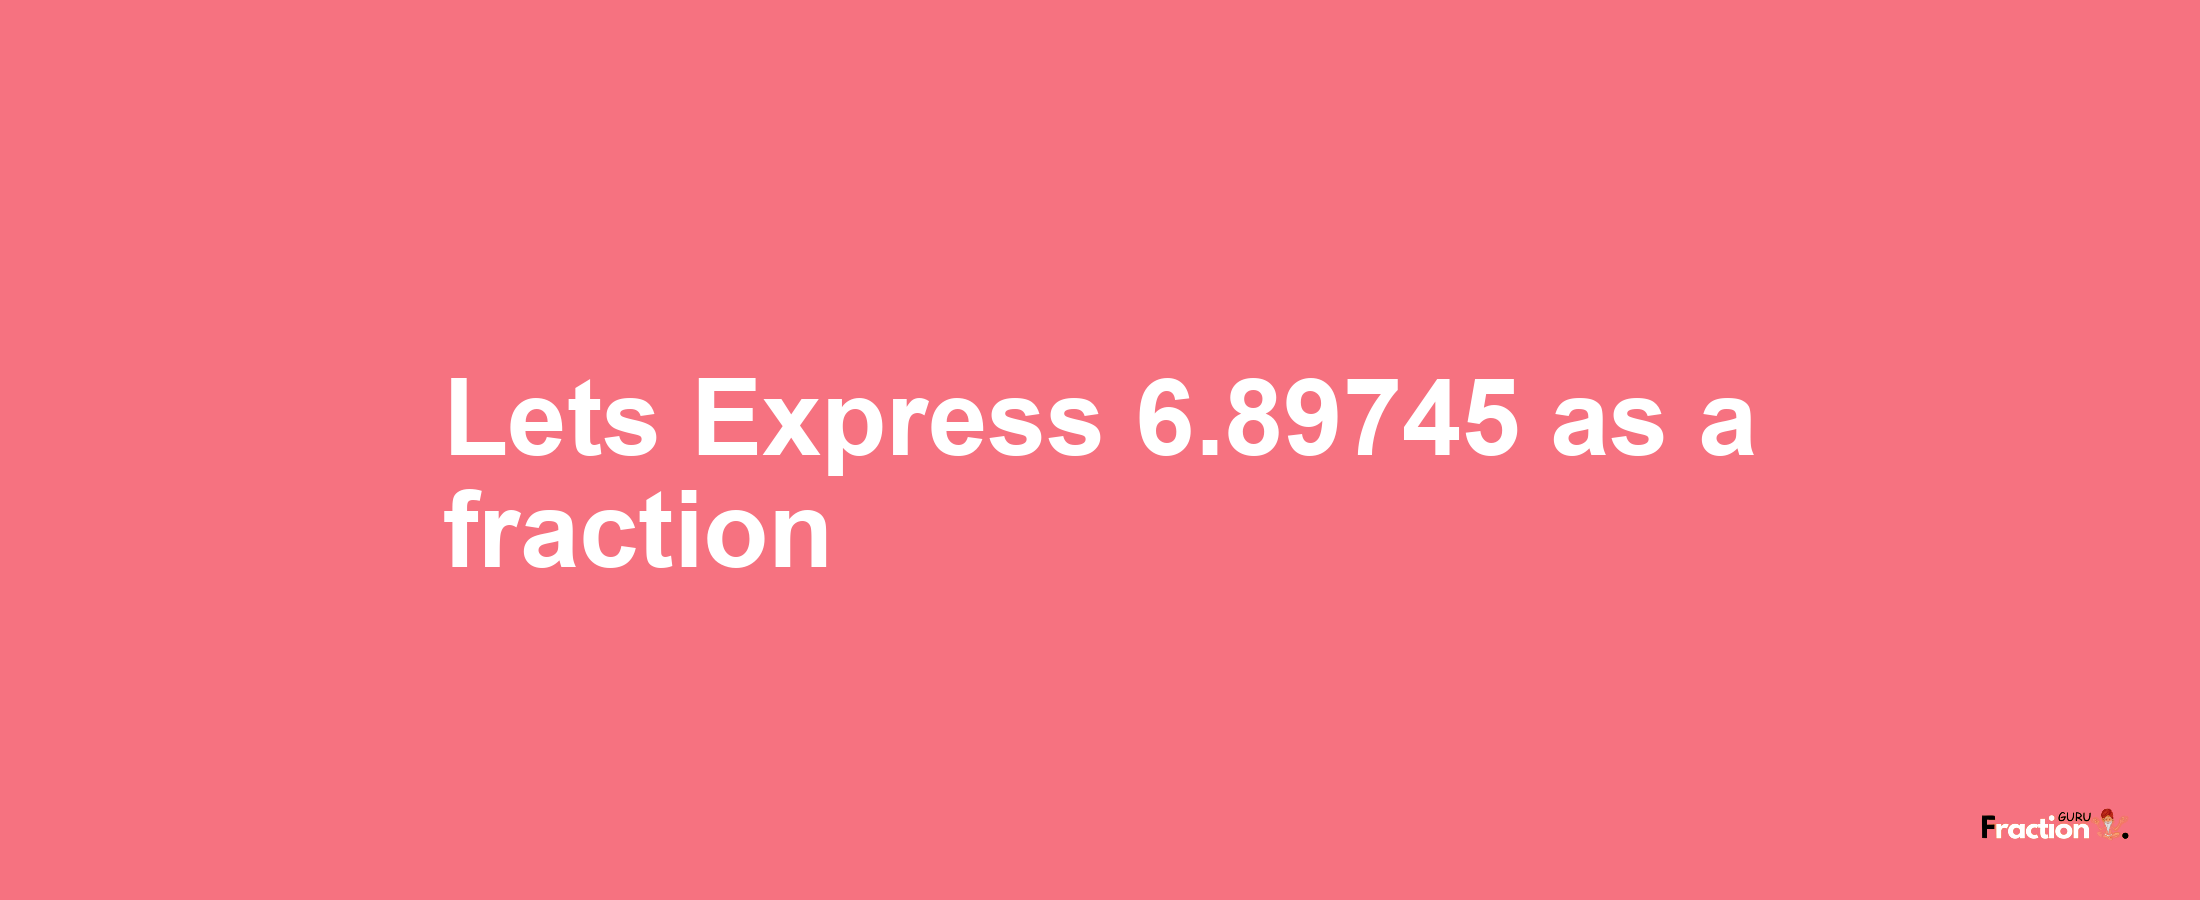 Lets Express 6.89745 as afraction